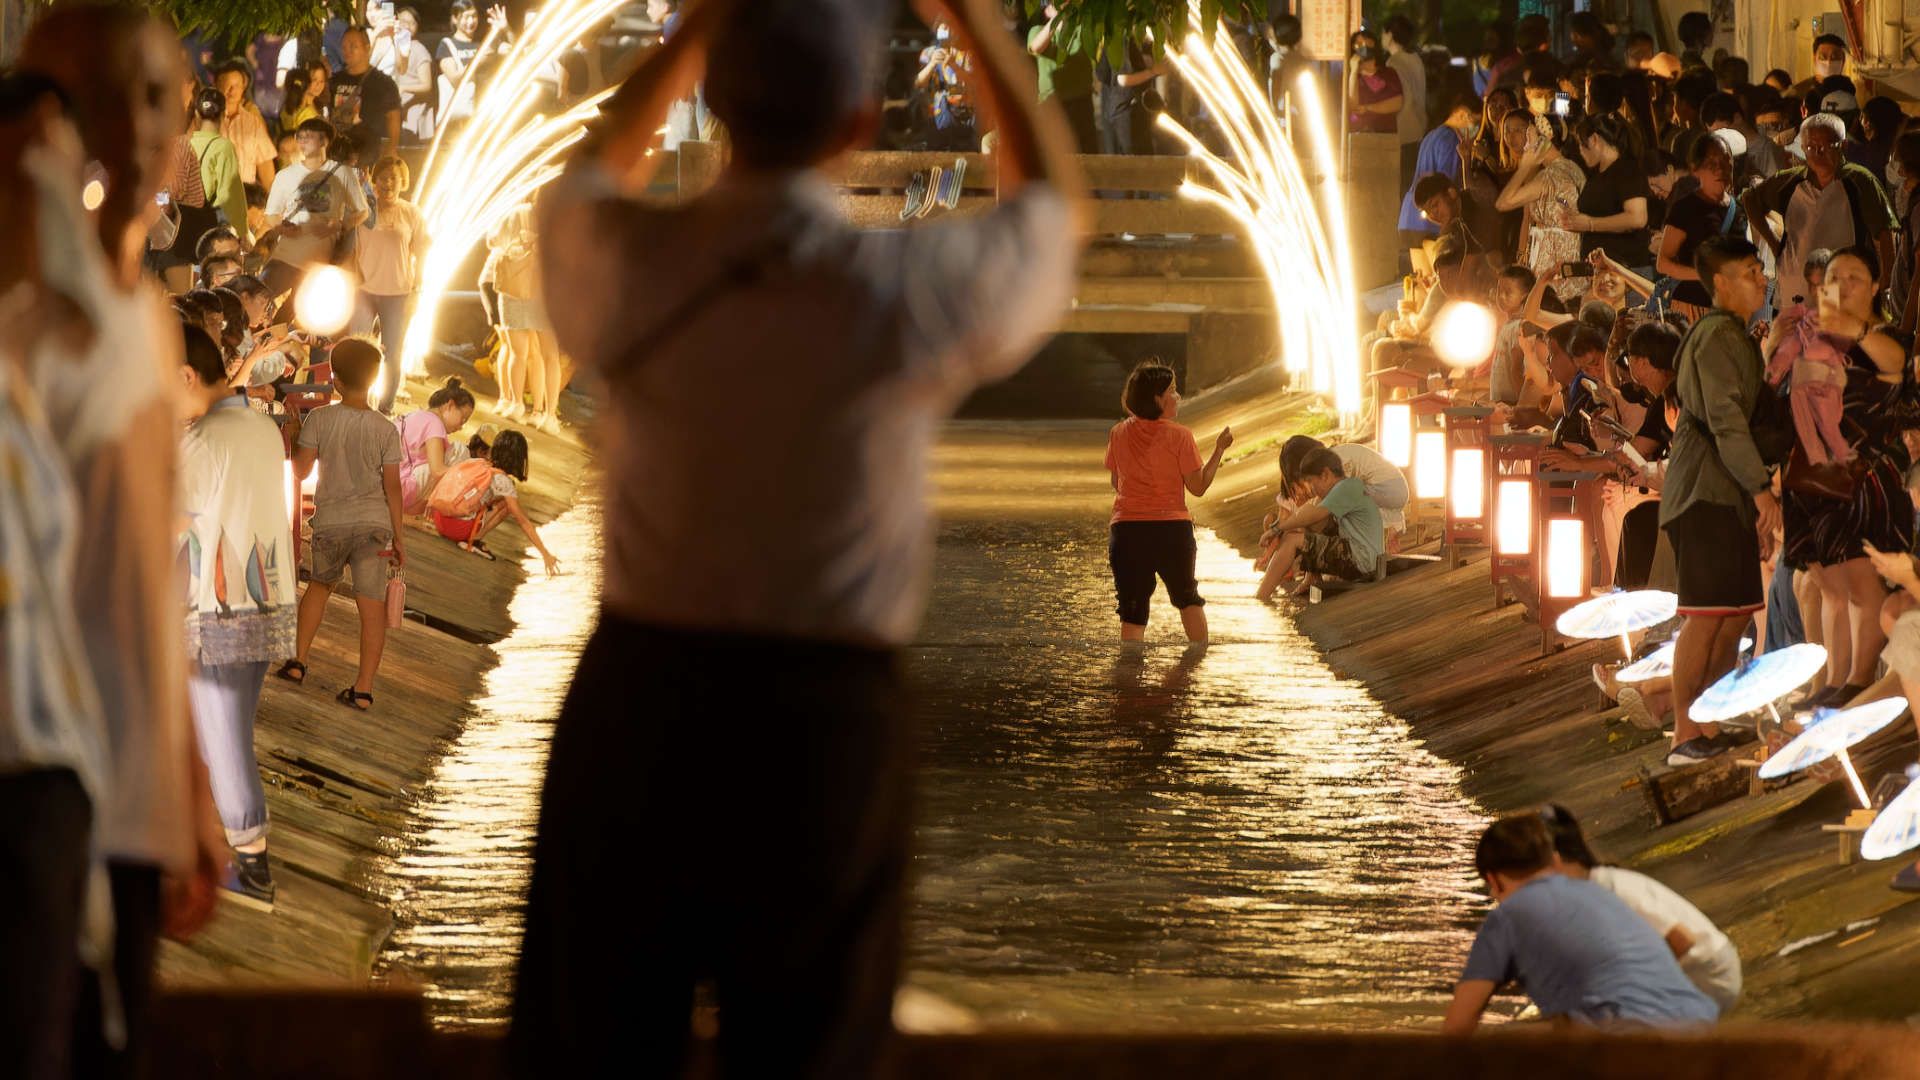 Crowds of people alongside a Meinong canal at night, lit by canal-side lanterns. A few people are in, or touching, the water.